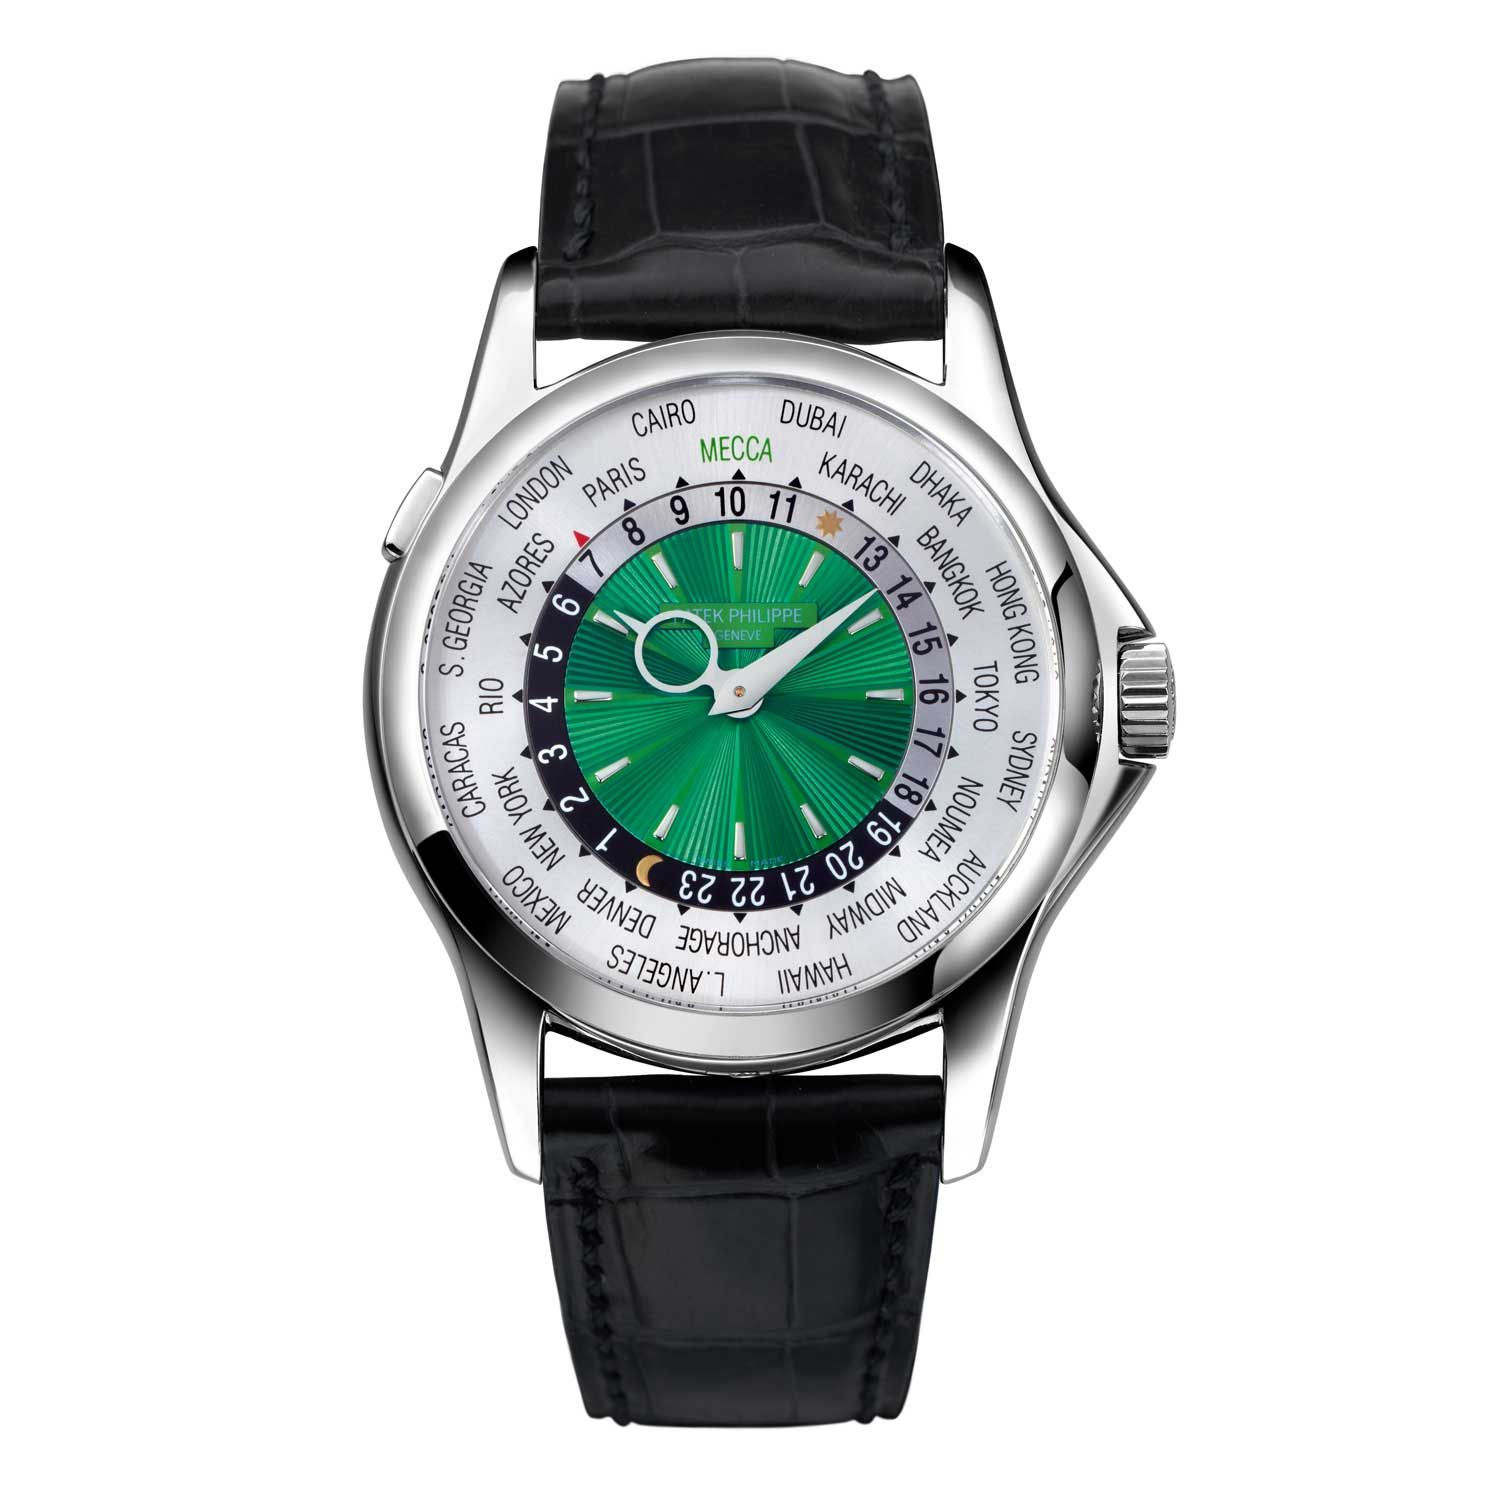 The ref. 5130P “Mecca” in platinum with a green dial